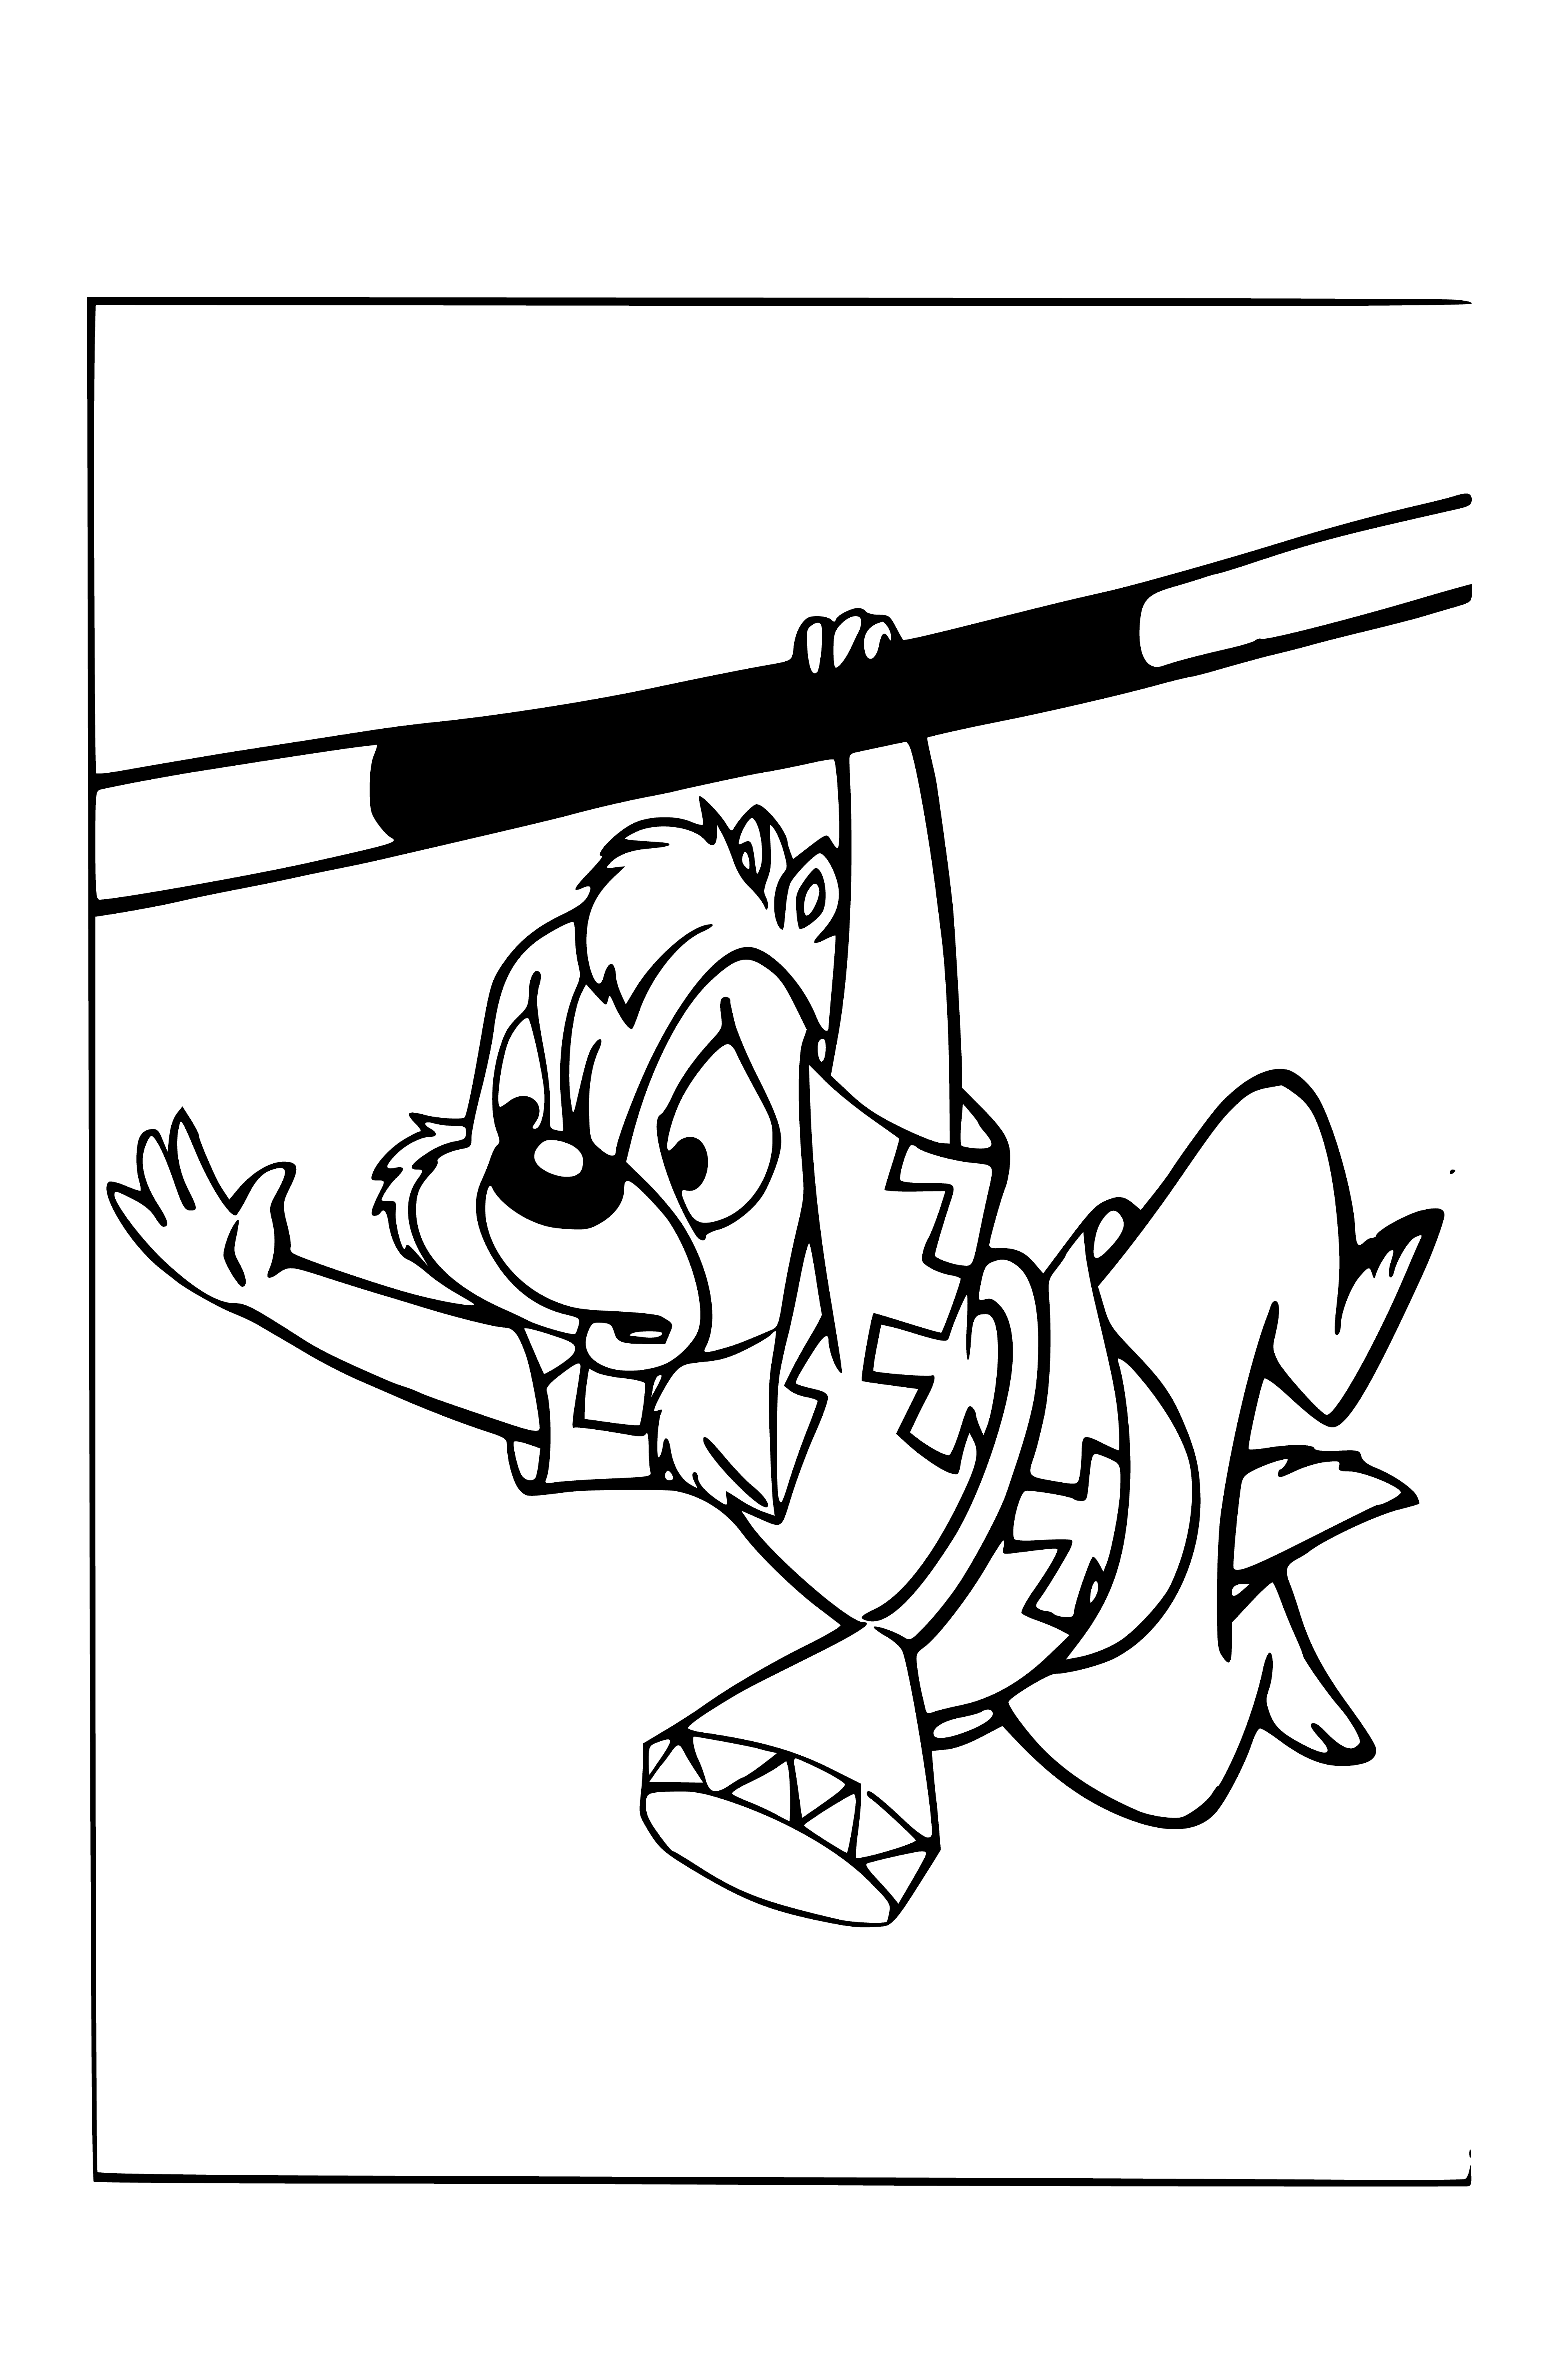 Dale with ring coloring page